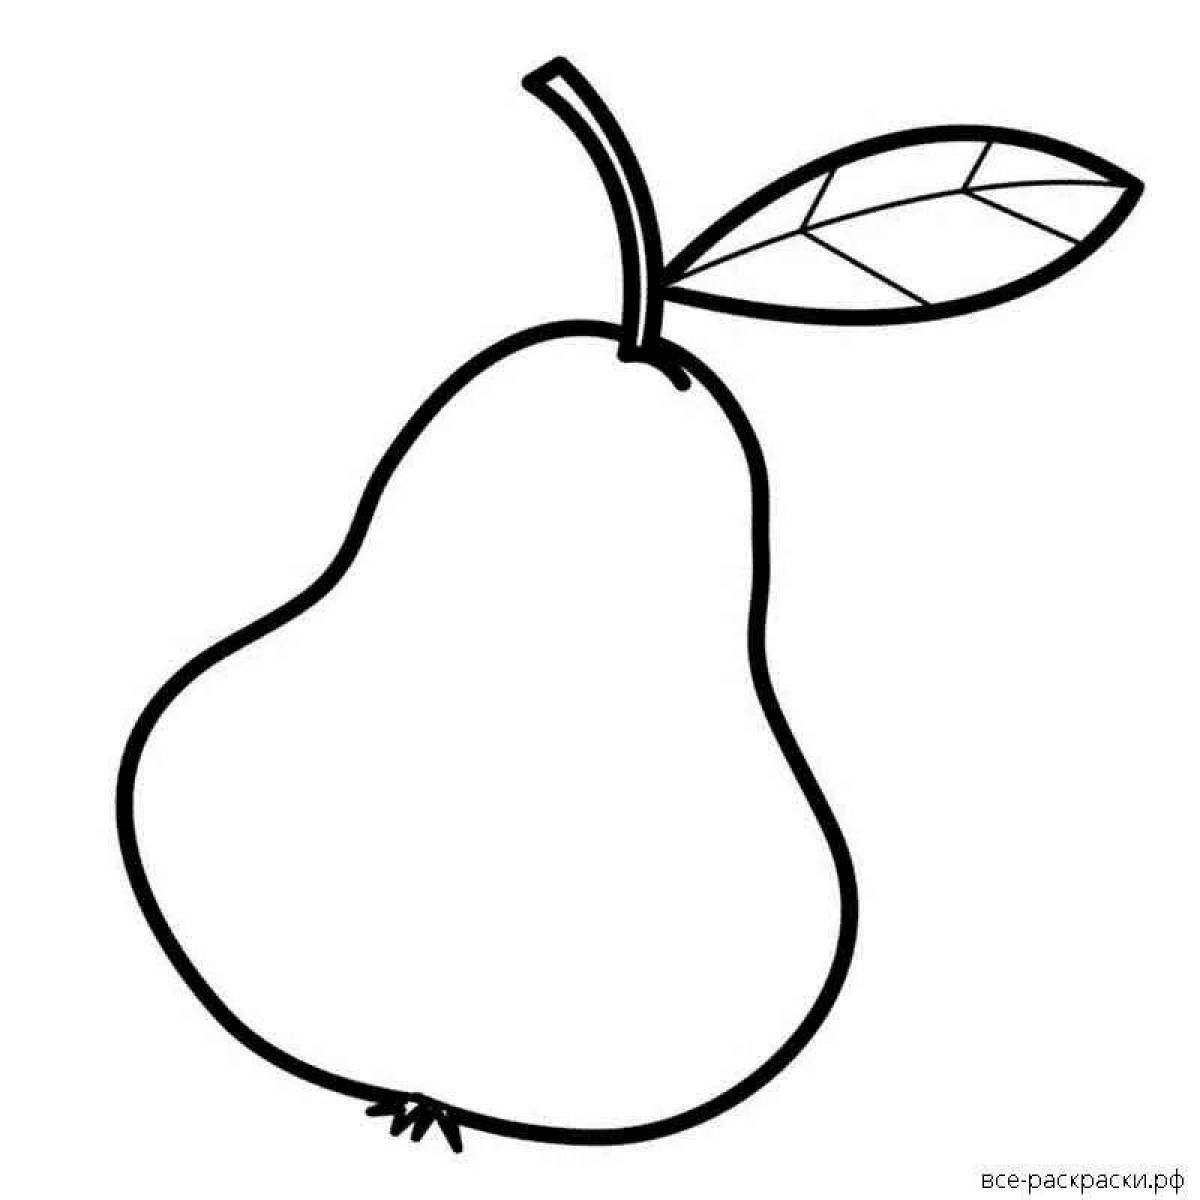 Glowing apples and pears coloring book